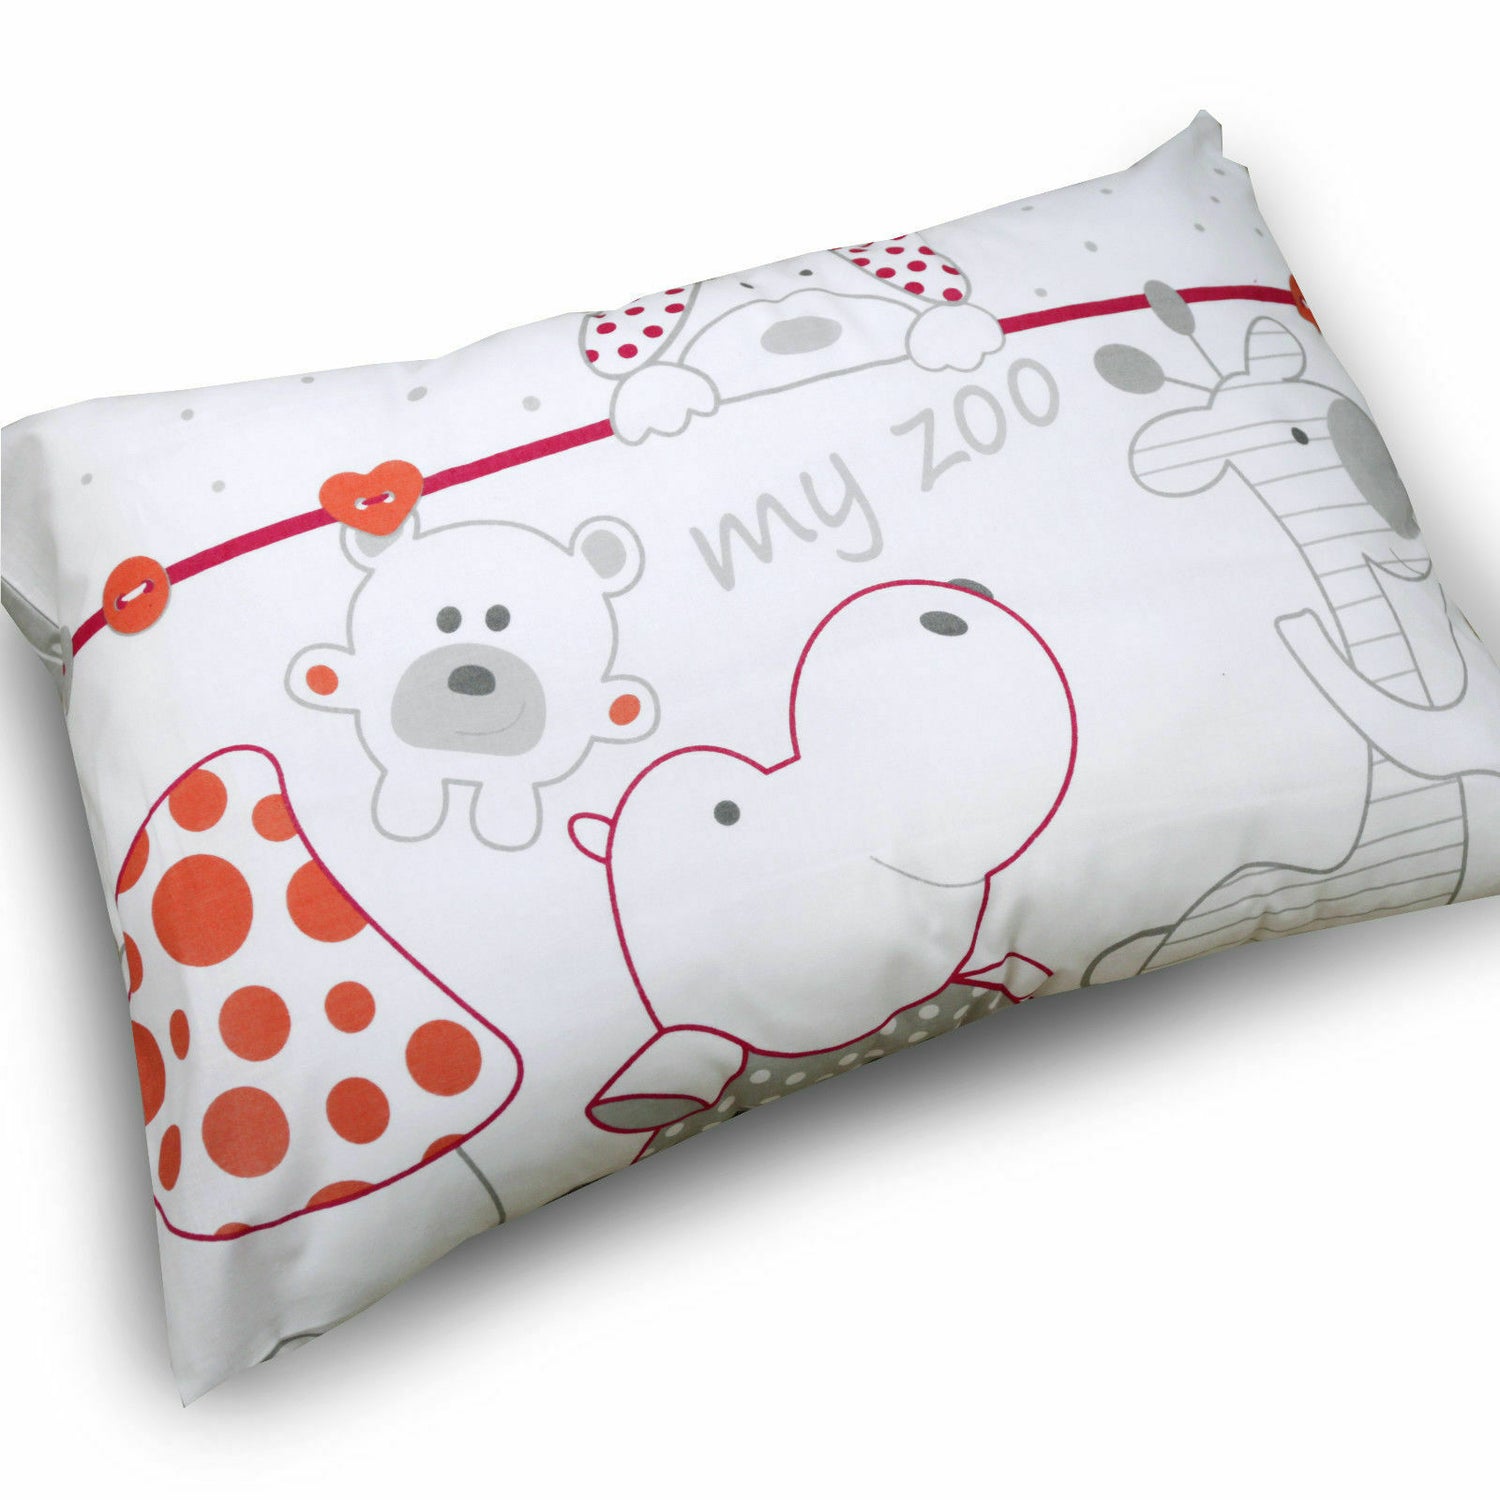 Baby Pillow case with zipper closure 60x40cm Cotton ANTI-ALLERGENIC Zoo red